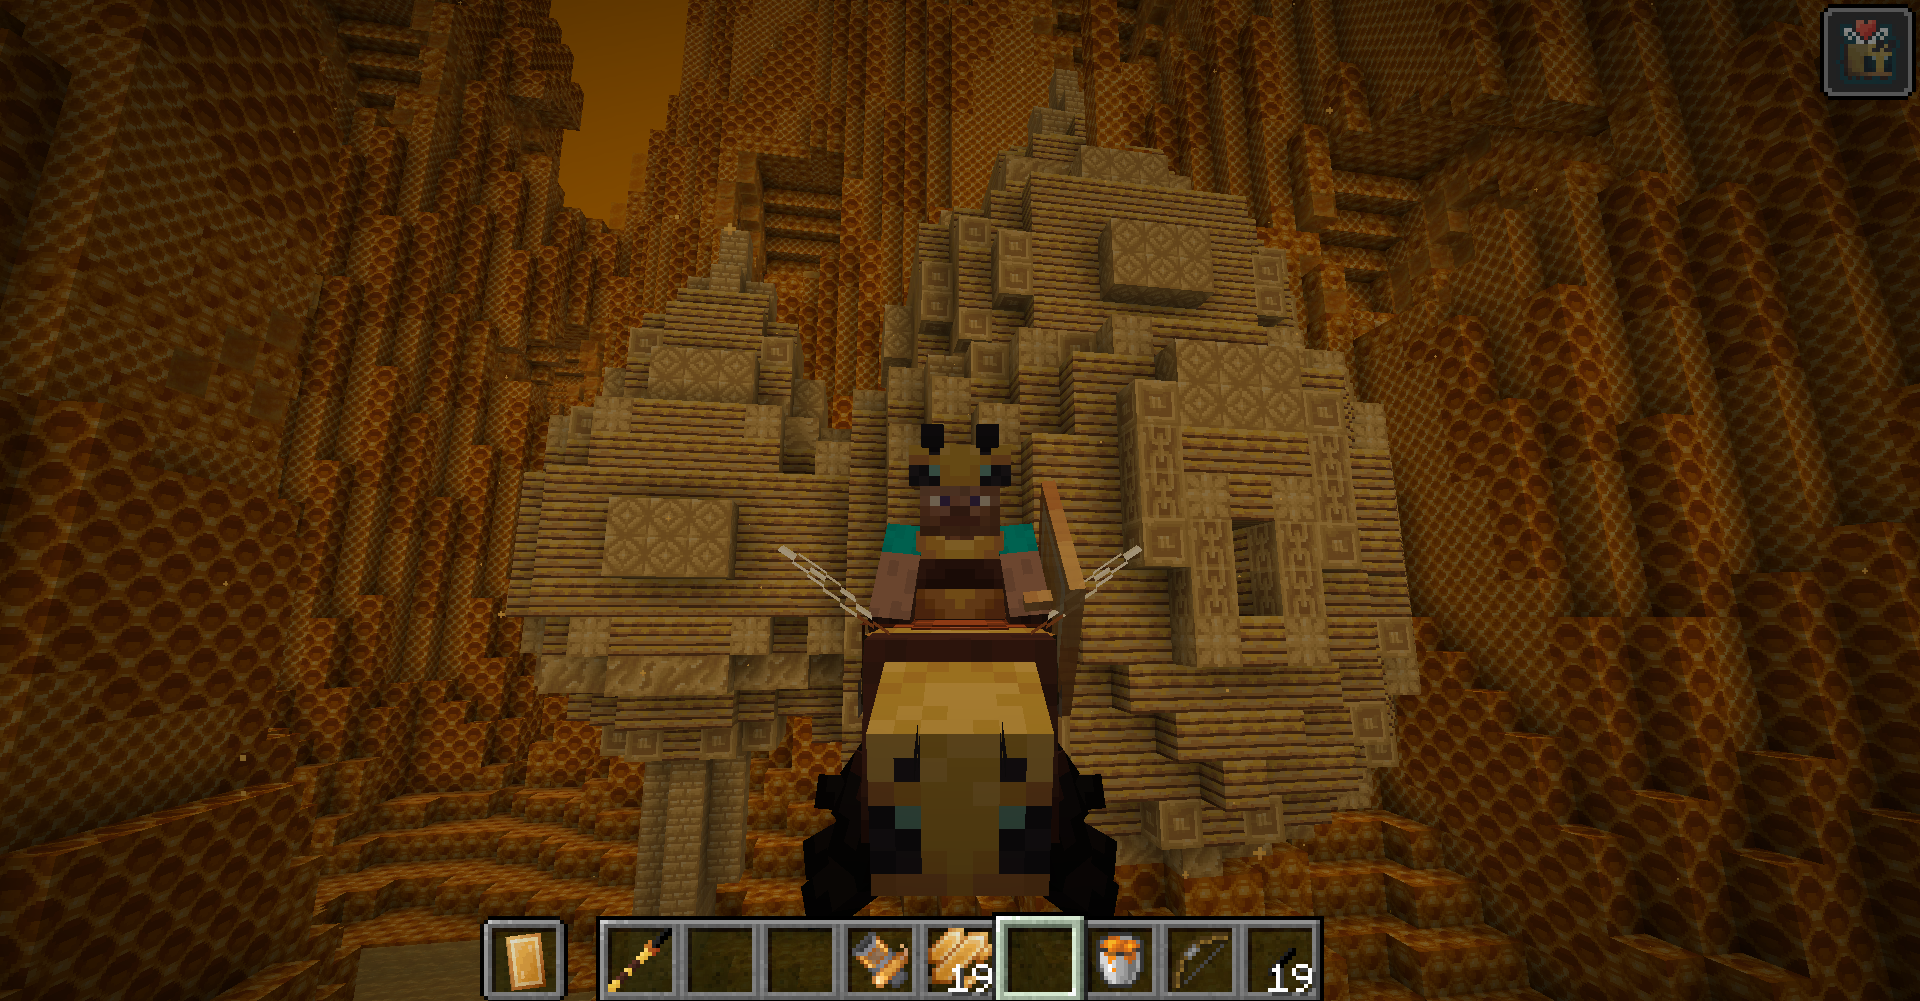 Riding Beehemoth with Hive Temple behind